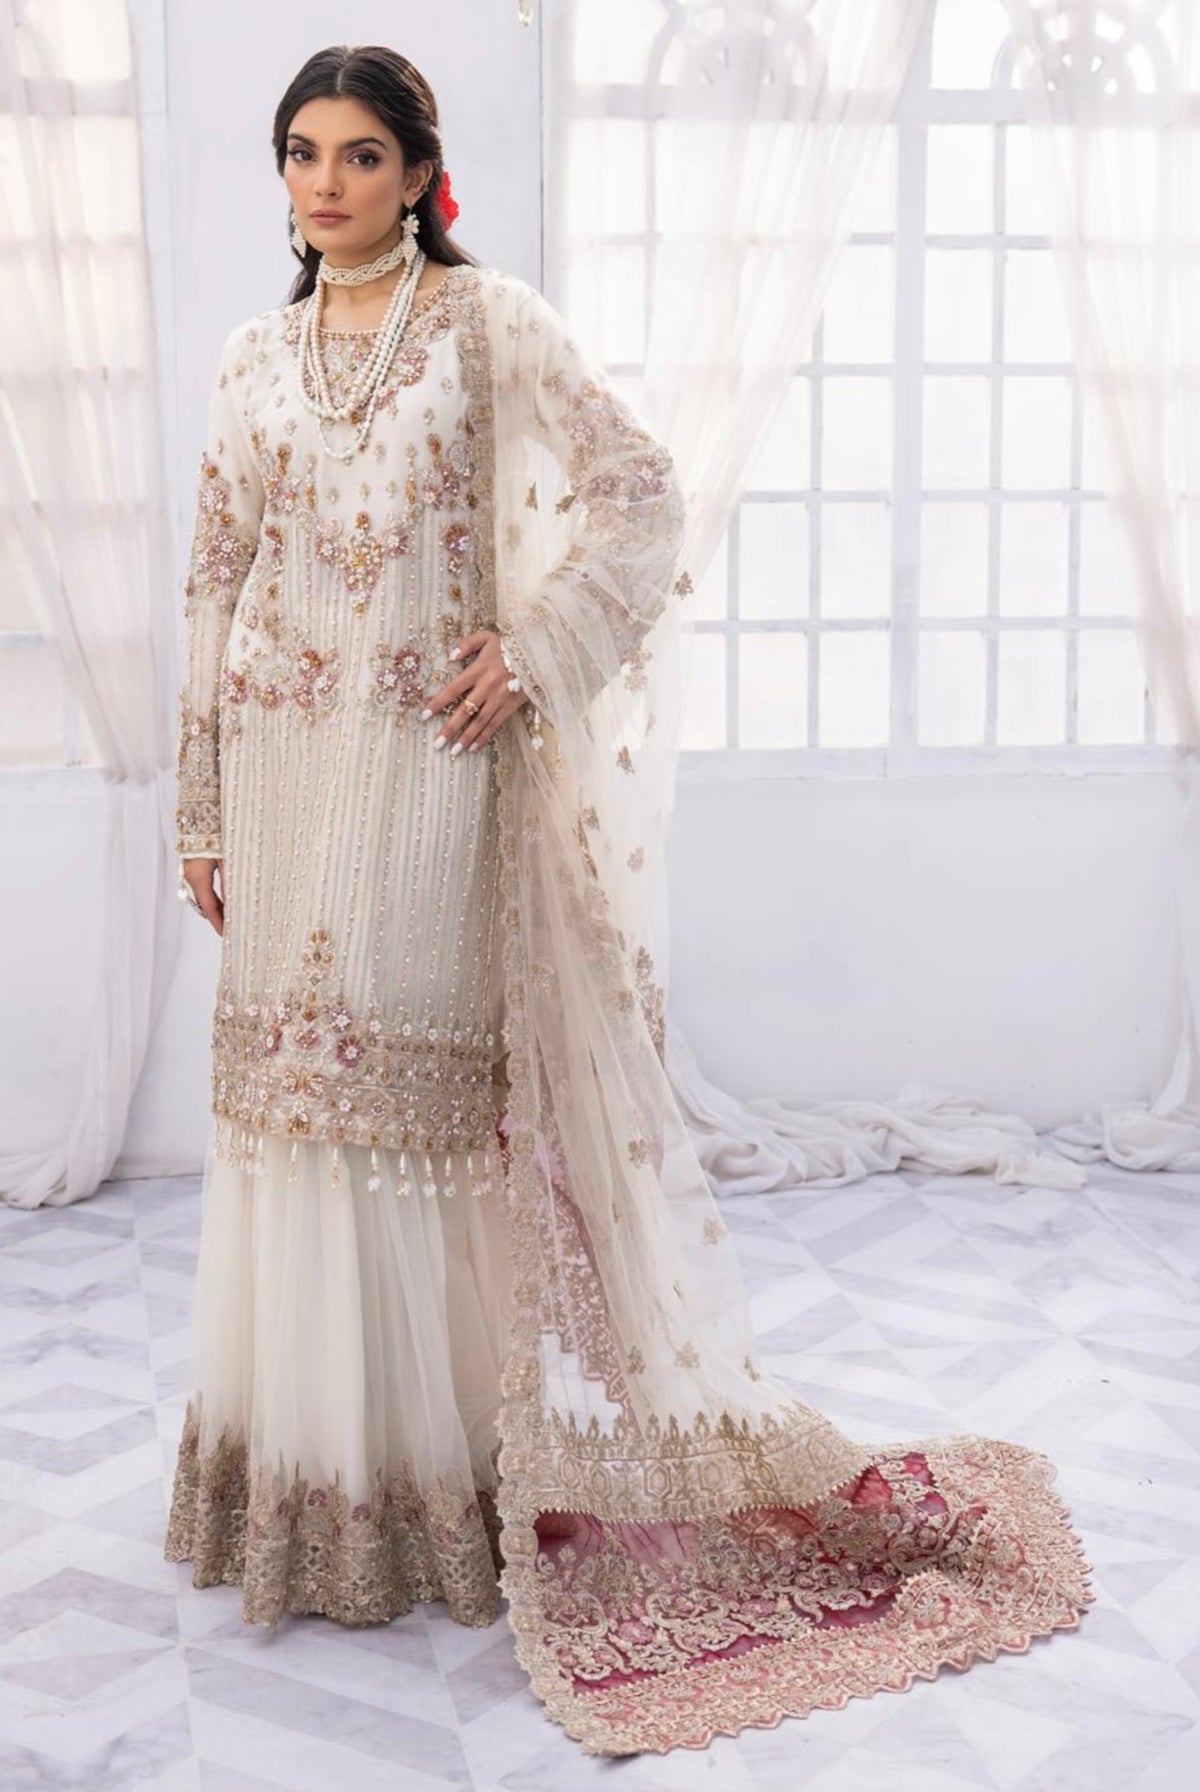 SIMRANS LUXURY Premium Embroidered 3 Piece Lilac Wedding Outfit LCR:9014